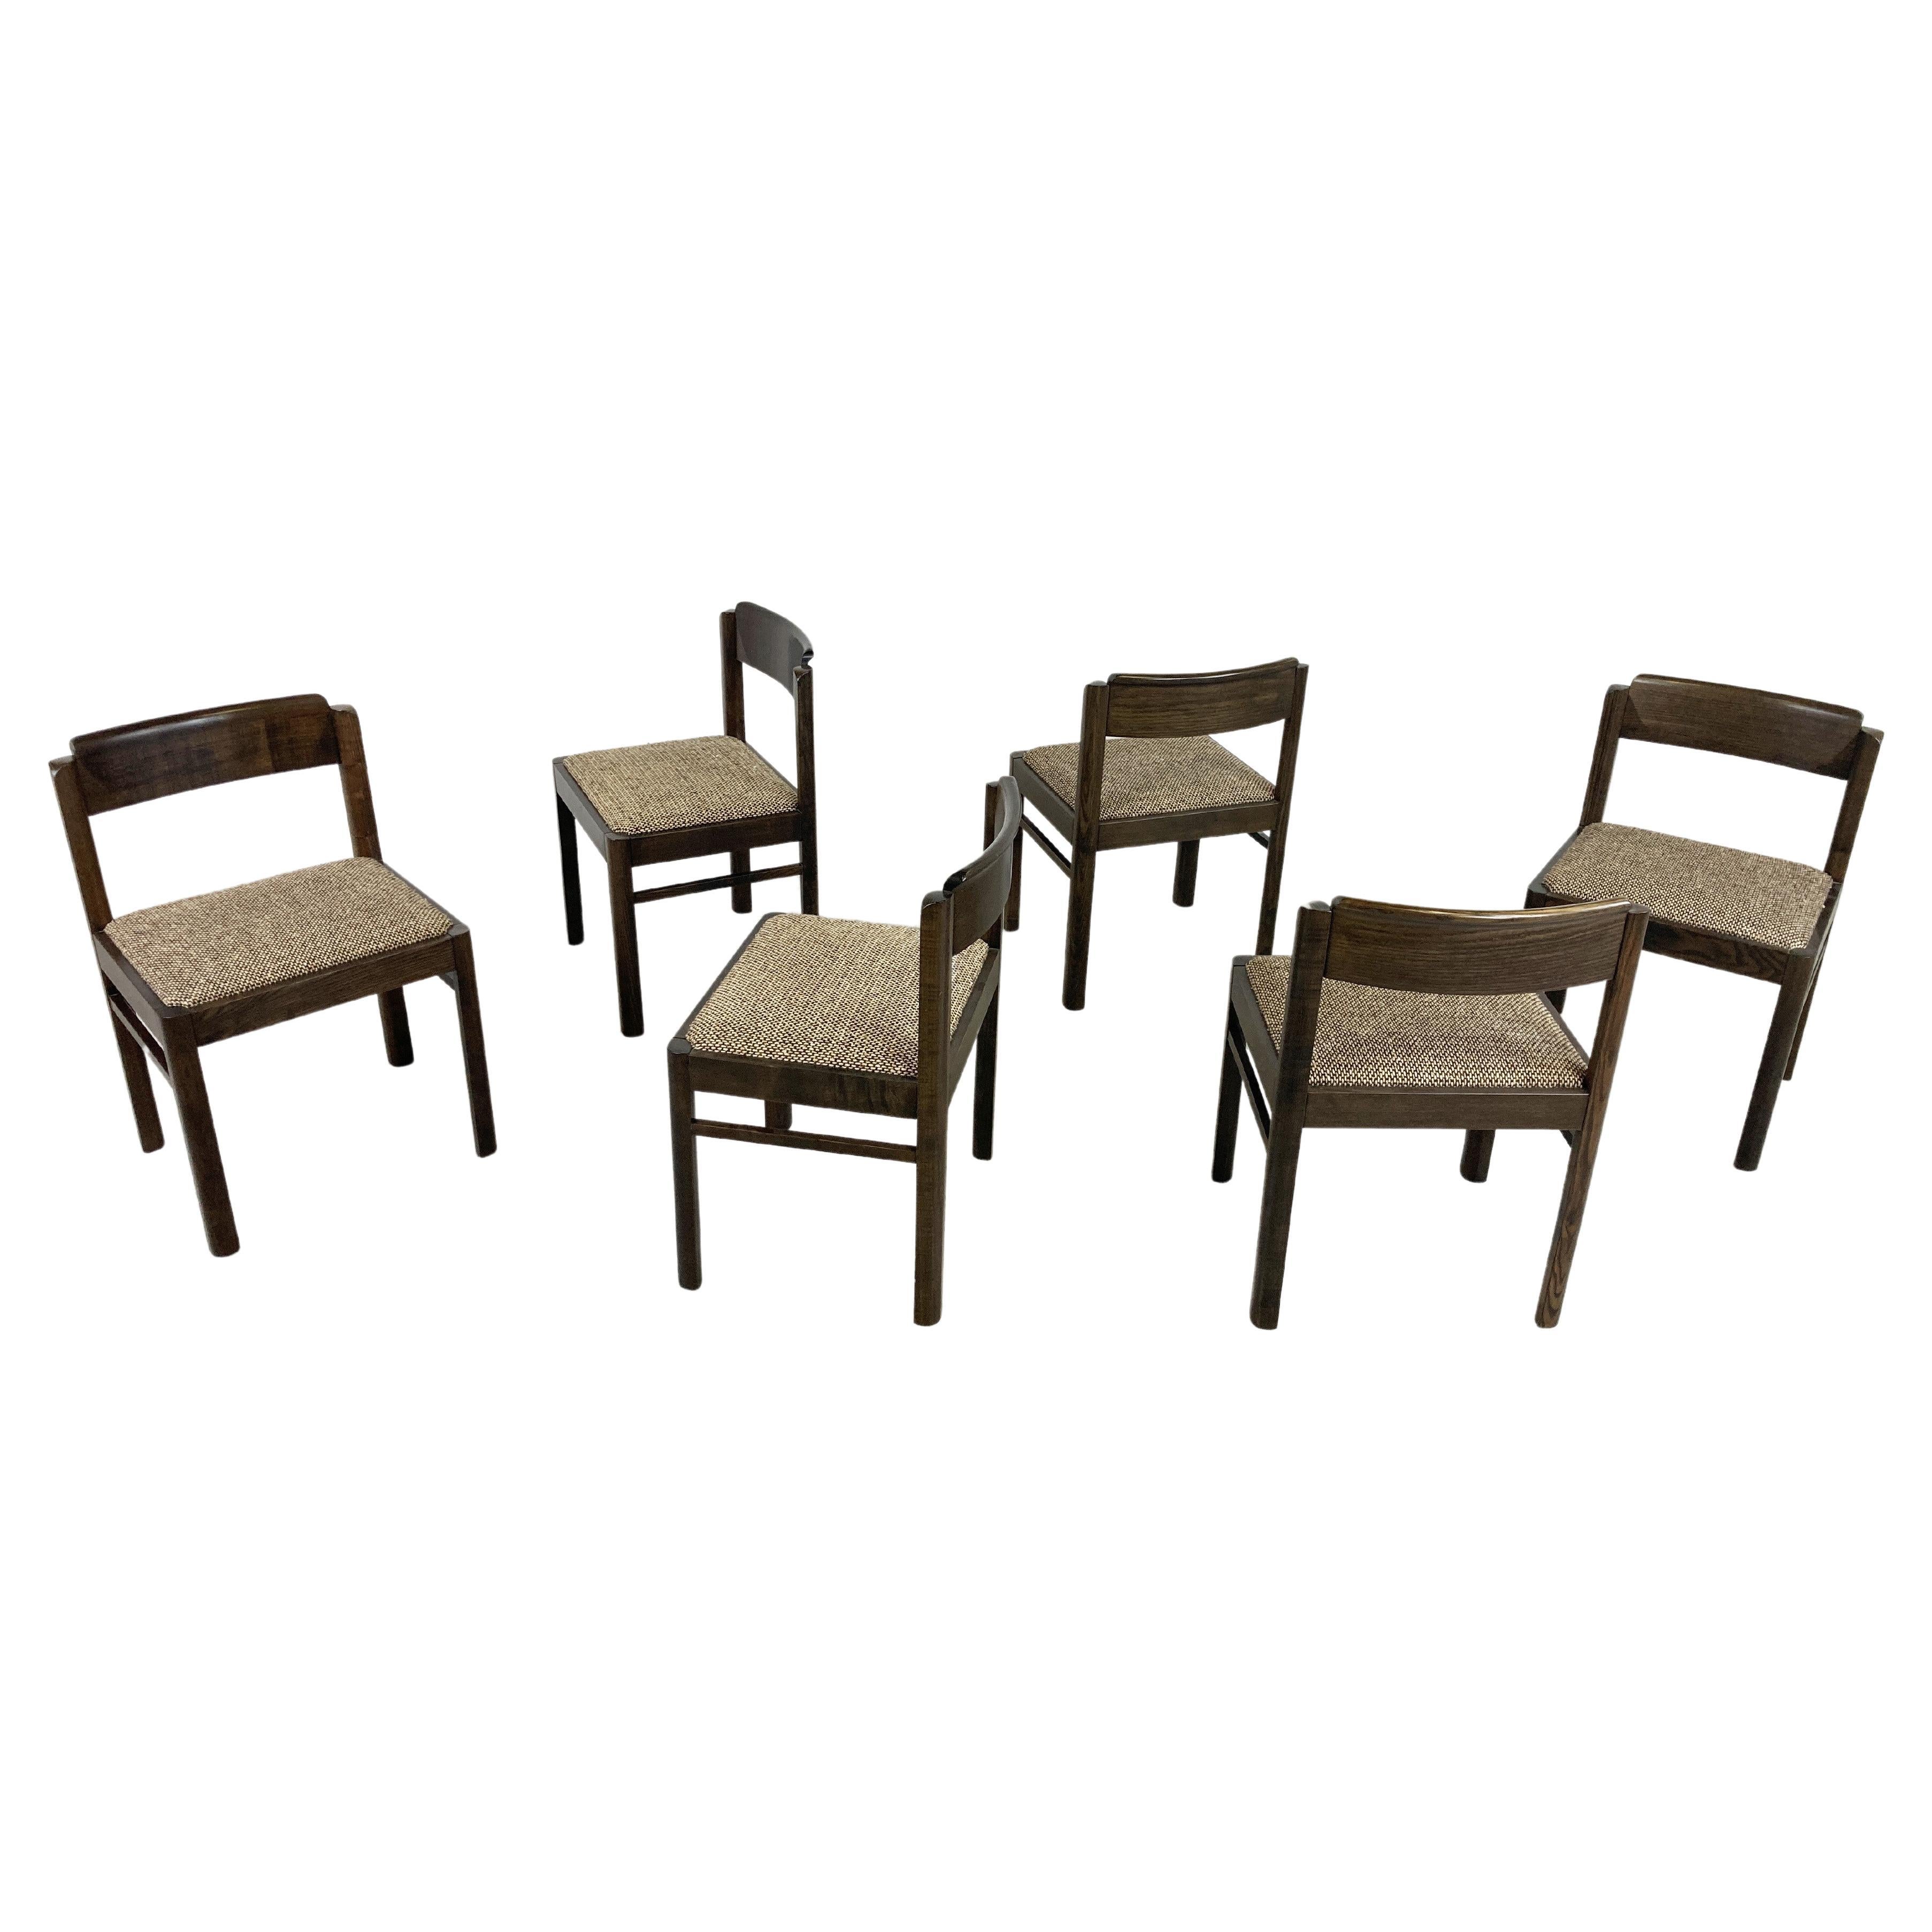 Vintage Brutalist Dining Chairs, Set of 6, 1970s